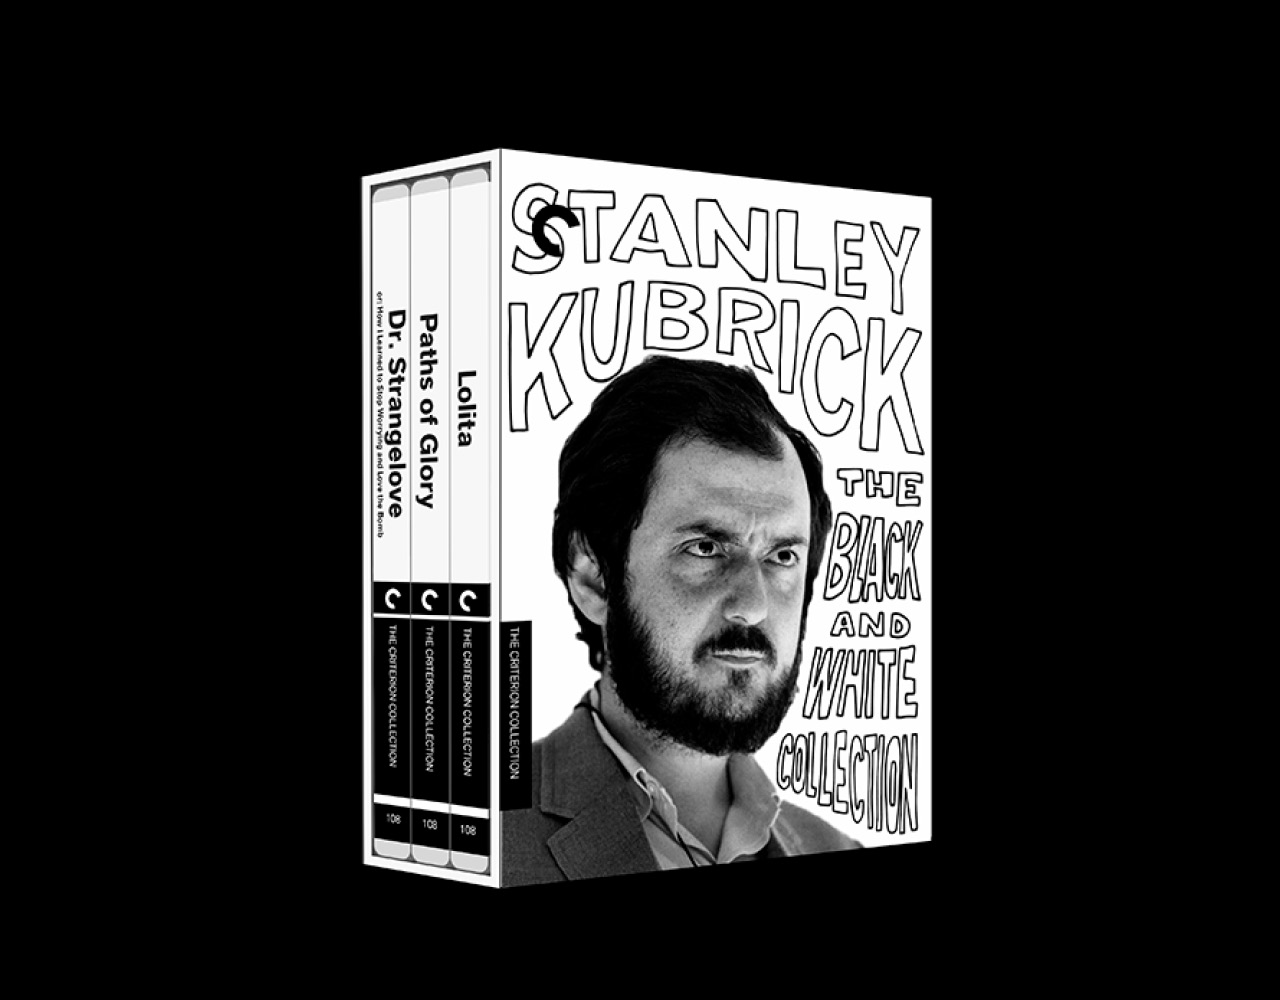 Stanley Kubrick: The Black and White Collection